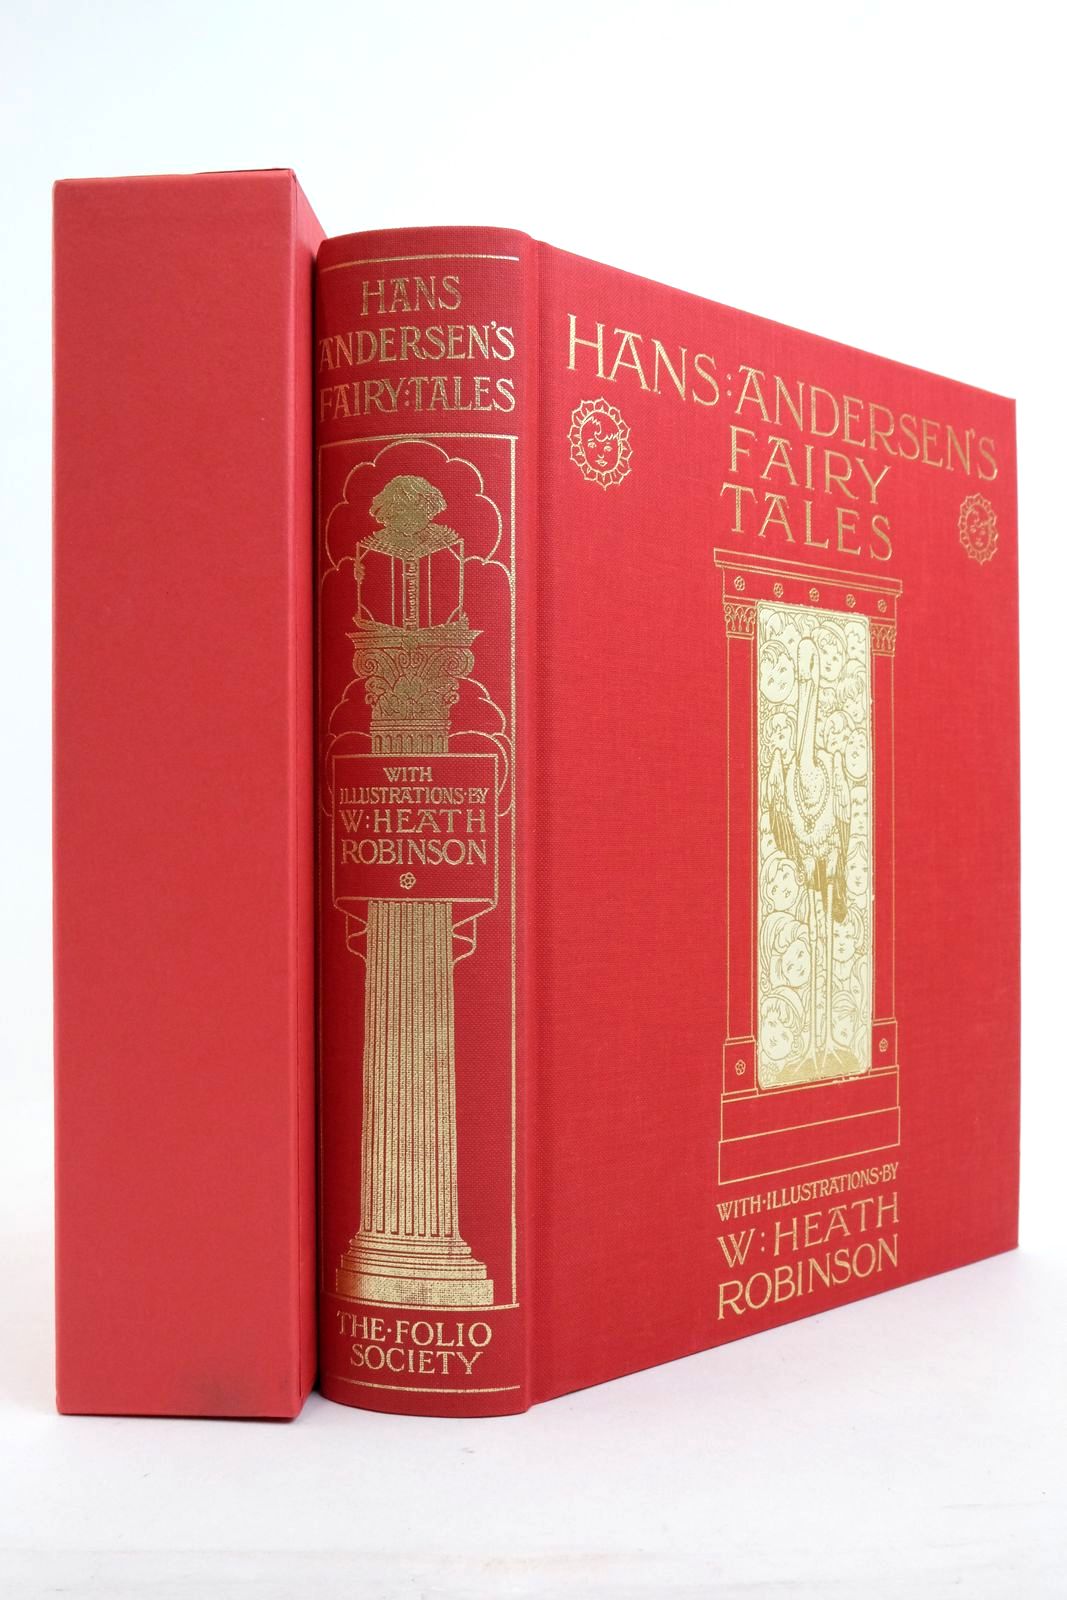 Photo of HANS ANDERSEN'S FAIRY TALES written by Andersen, Hans Christian illustrated by Robinson, W. Heath published by Folio Society (STOCK CODE: 2138244)  for sale by Stella & Rose's Books